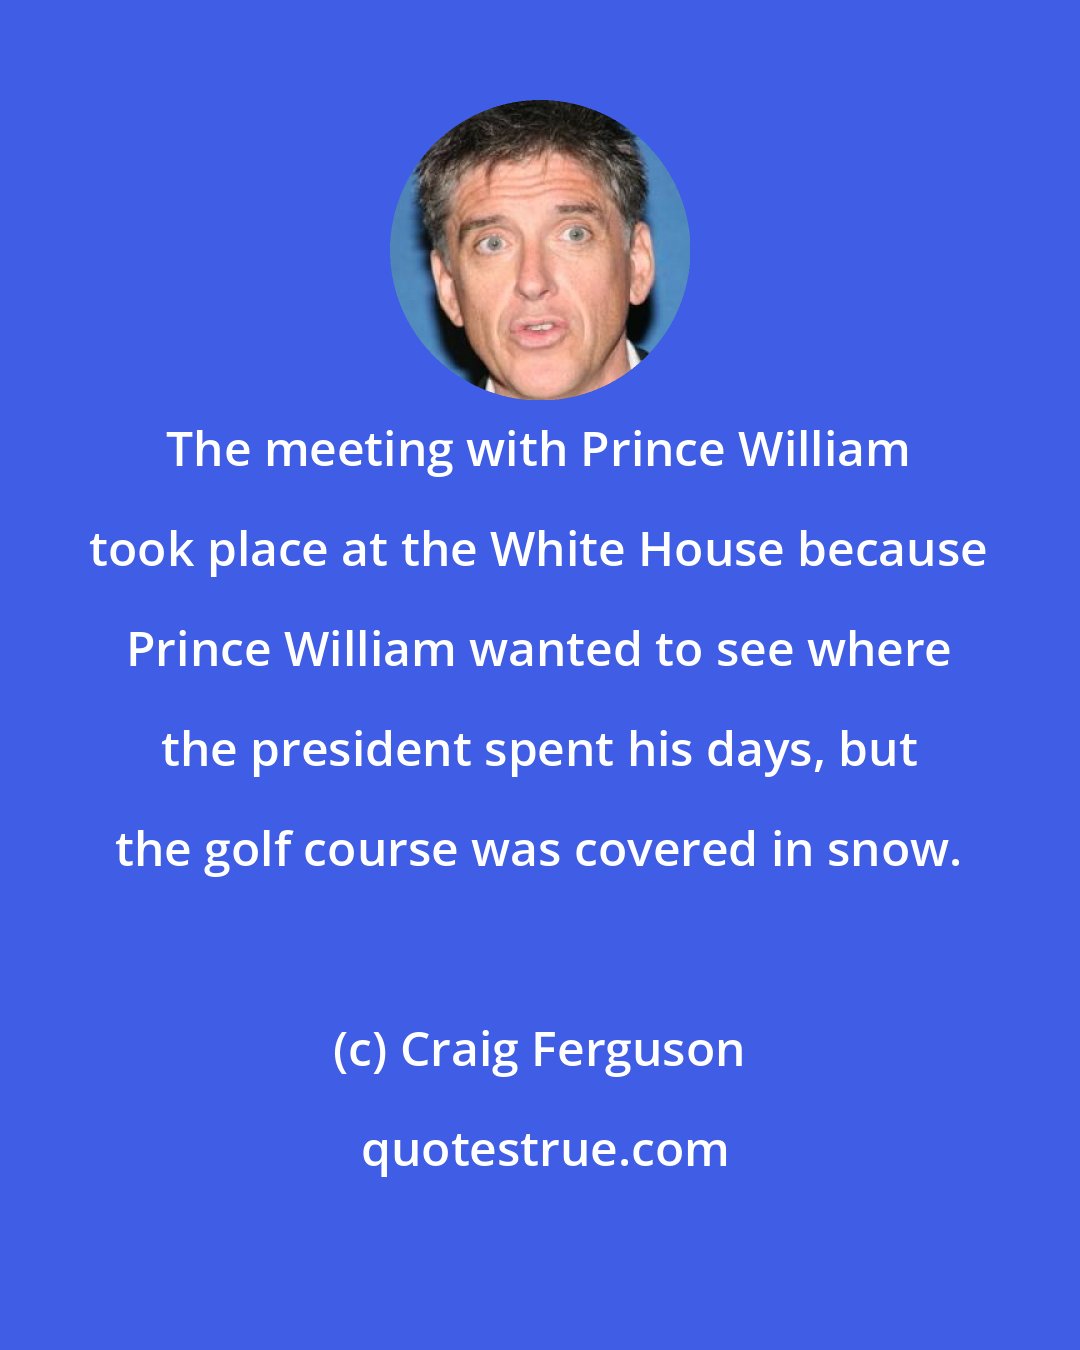 Craig Ferguson: The meeting with Prince William took place at the White House because Prince William wanted to see where the president spent his days, but the golf course was covered in snow.